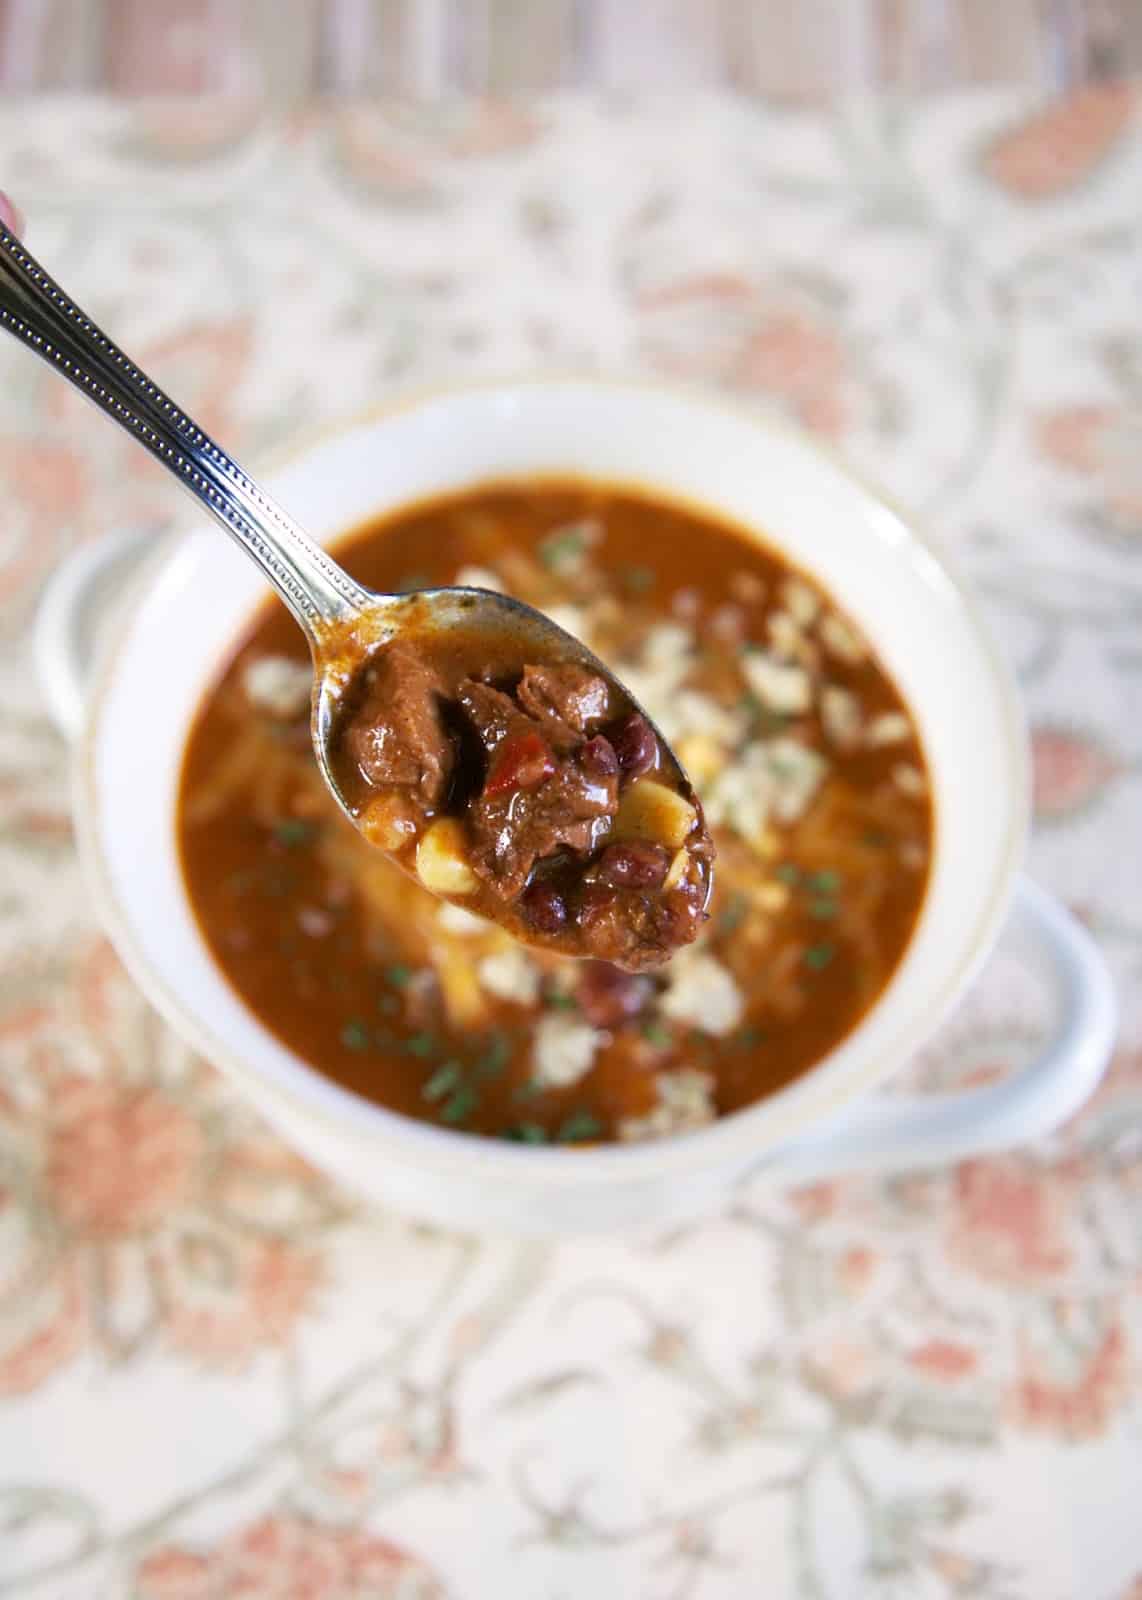 Beef Enchilada Soup made in the crock pot - so easy and tastes amazing! Stew meat, enchilada sauce, cheese soup, black beans, corn, beef broth, oregano and cheddar cheese. Throw everything in the slow cooker and dinner is done! Serve with some cornbread for an easy weeknight dinner. Can freeze and cook when ready. #soup #beef #slowcooker #crockpot #mexican #freezermeal